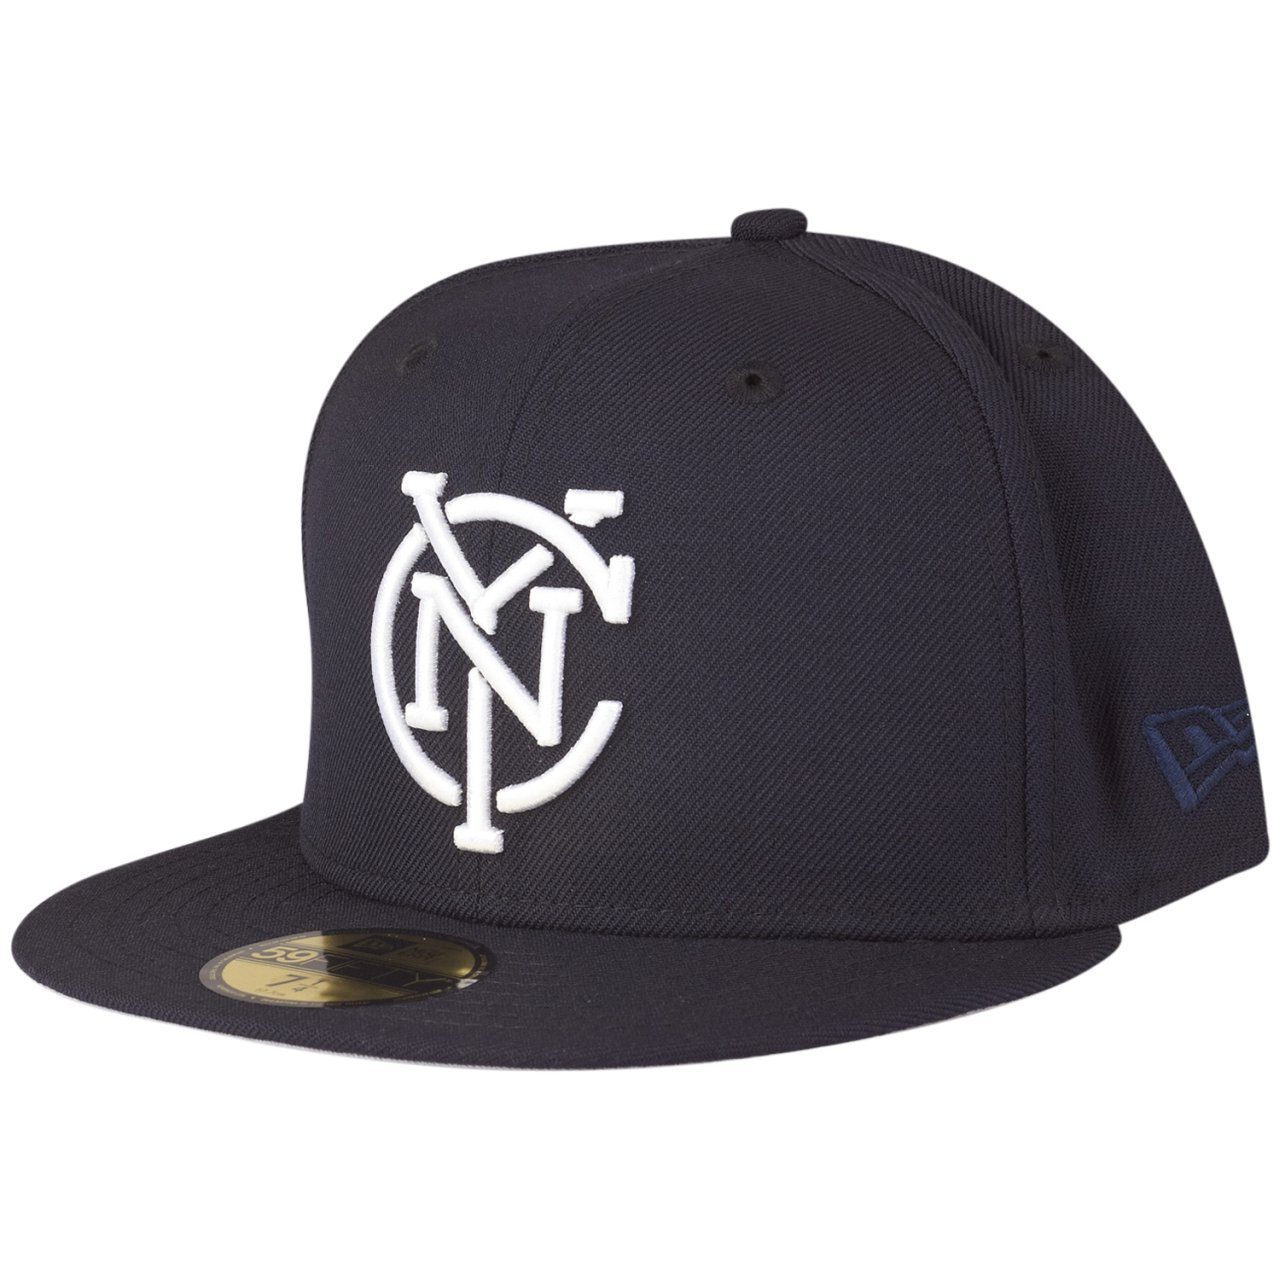 York Fitted Era New Cap 59Fifty MLS City New FC